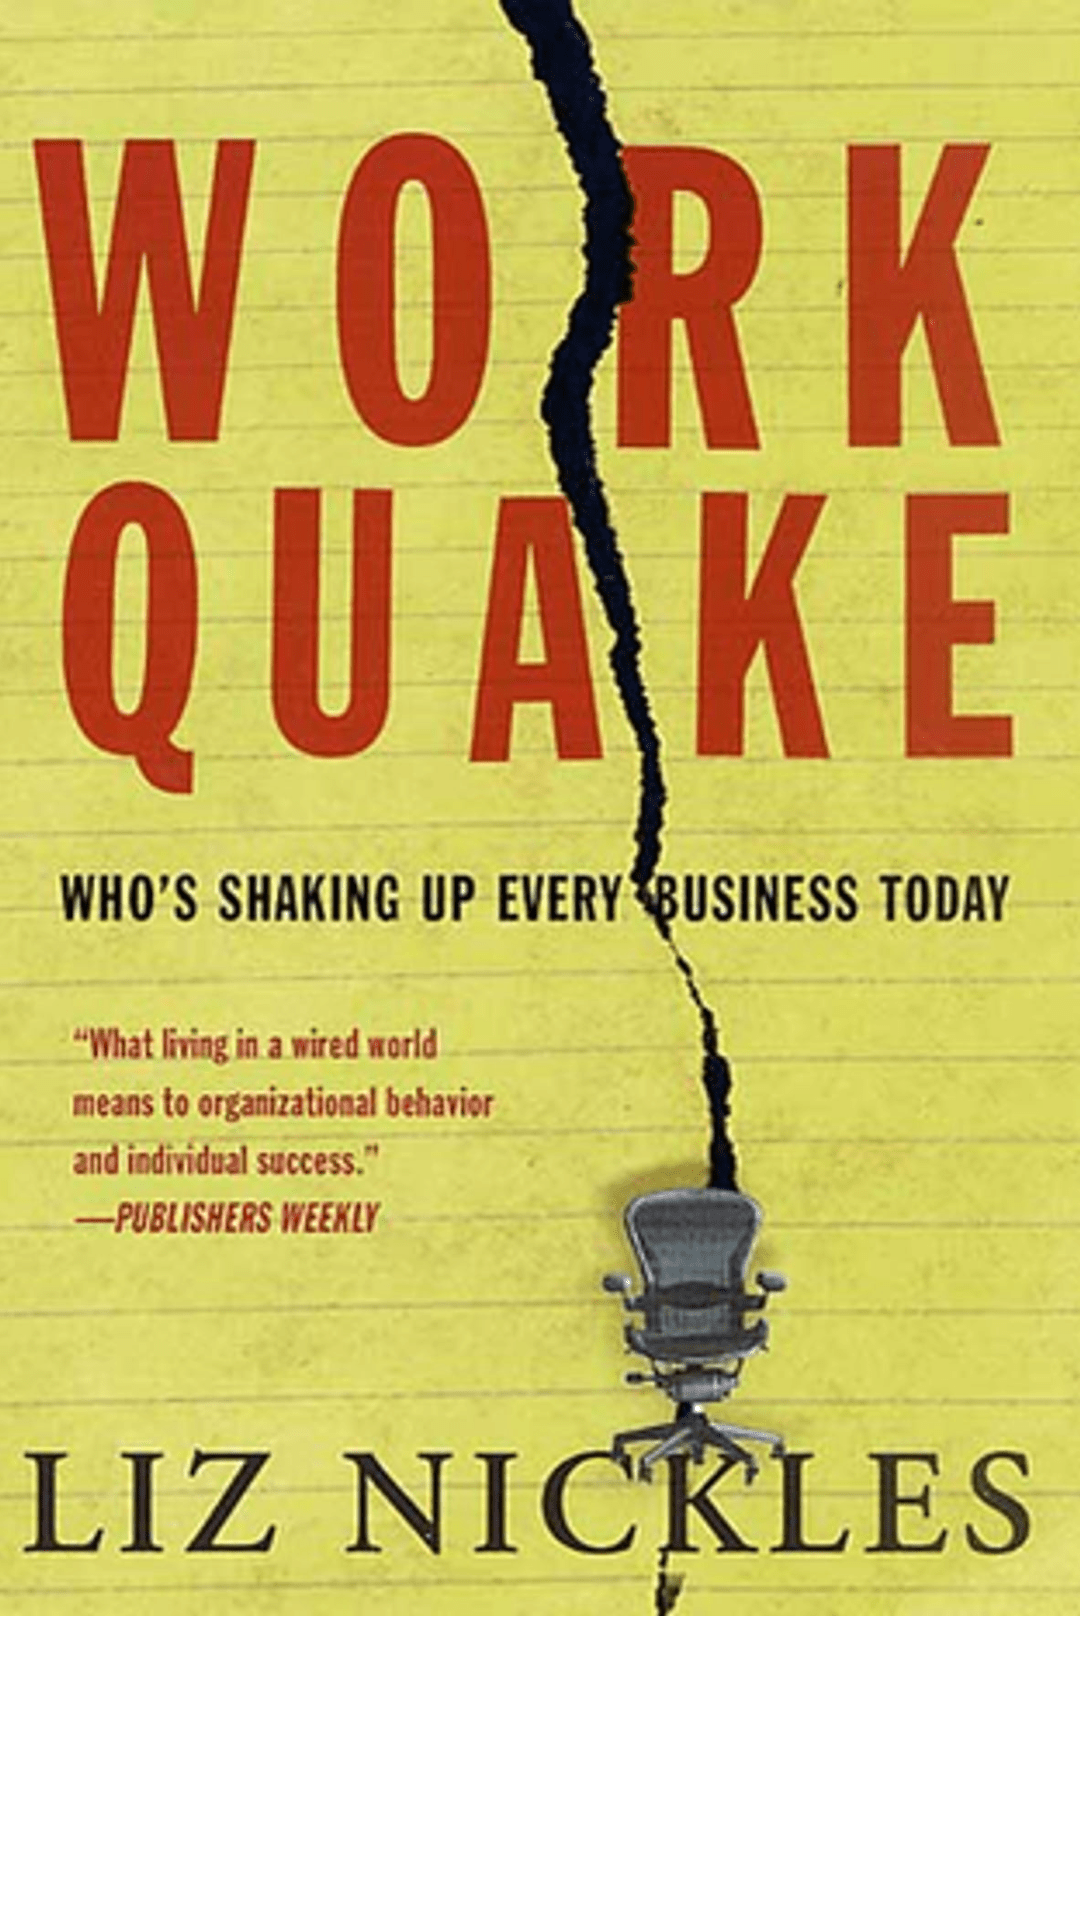 Work Quake: Who's Shaking Up Every Business Today